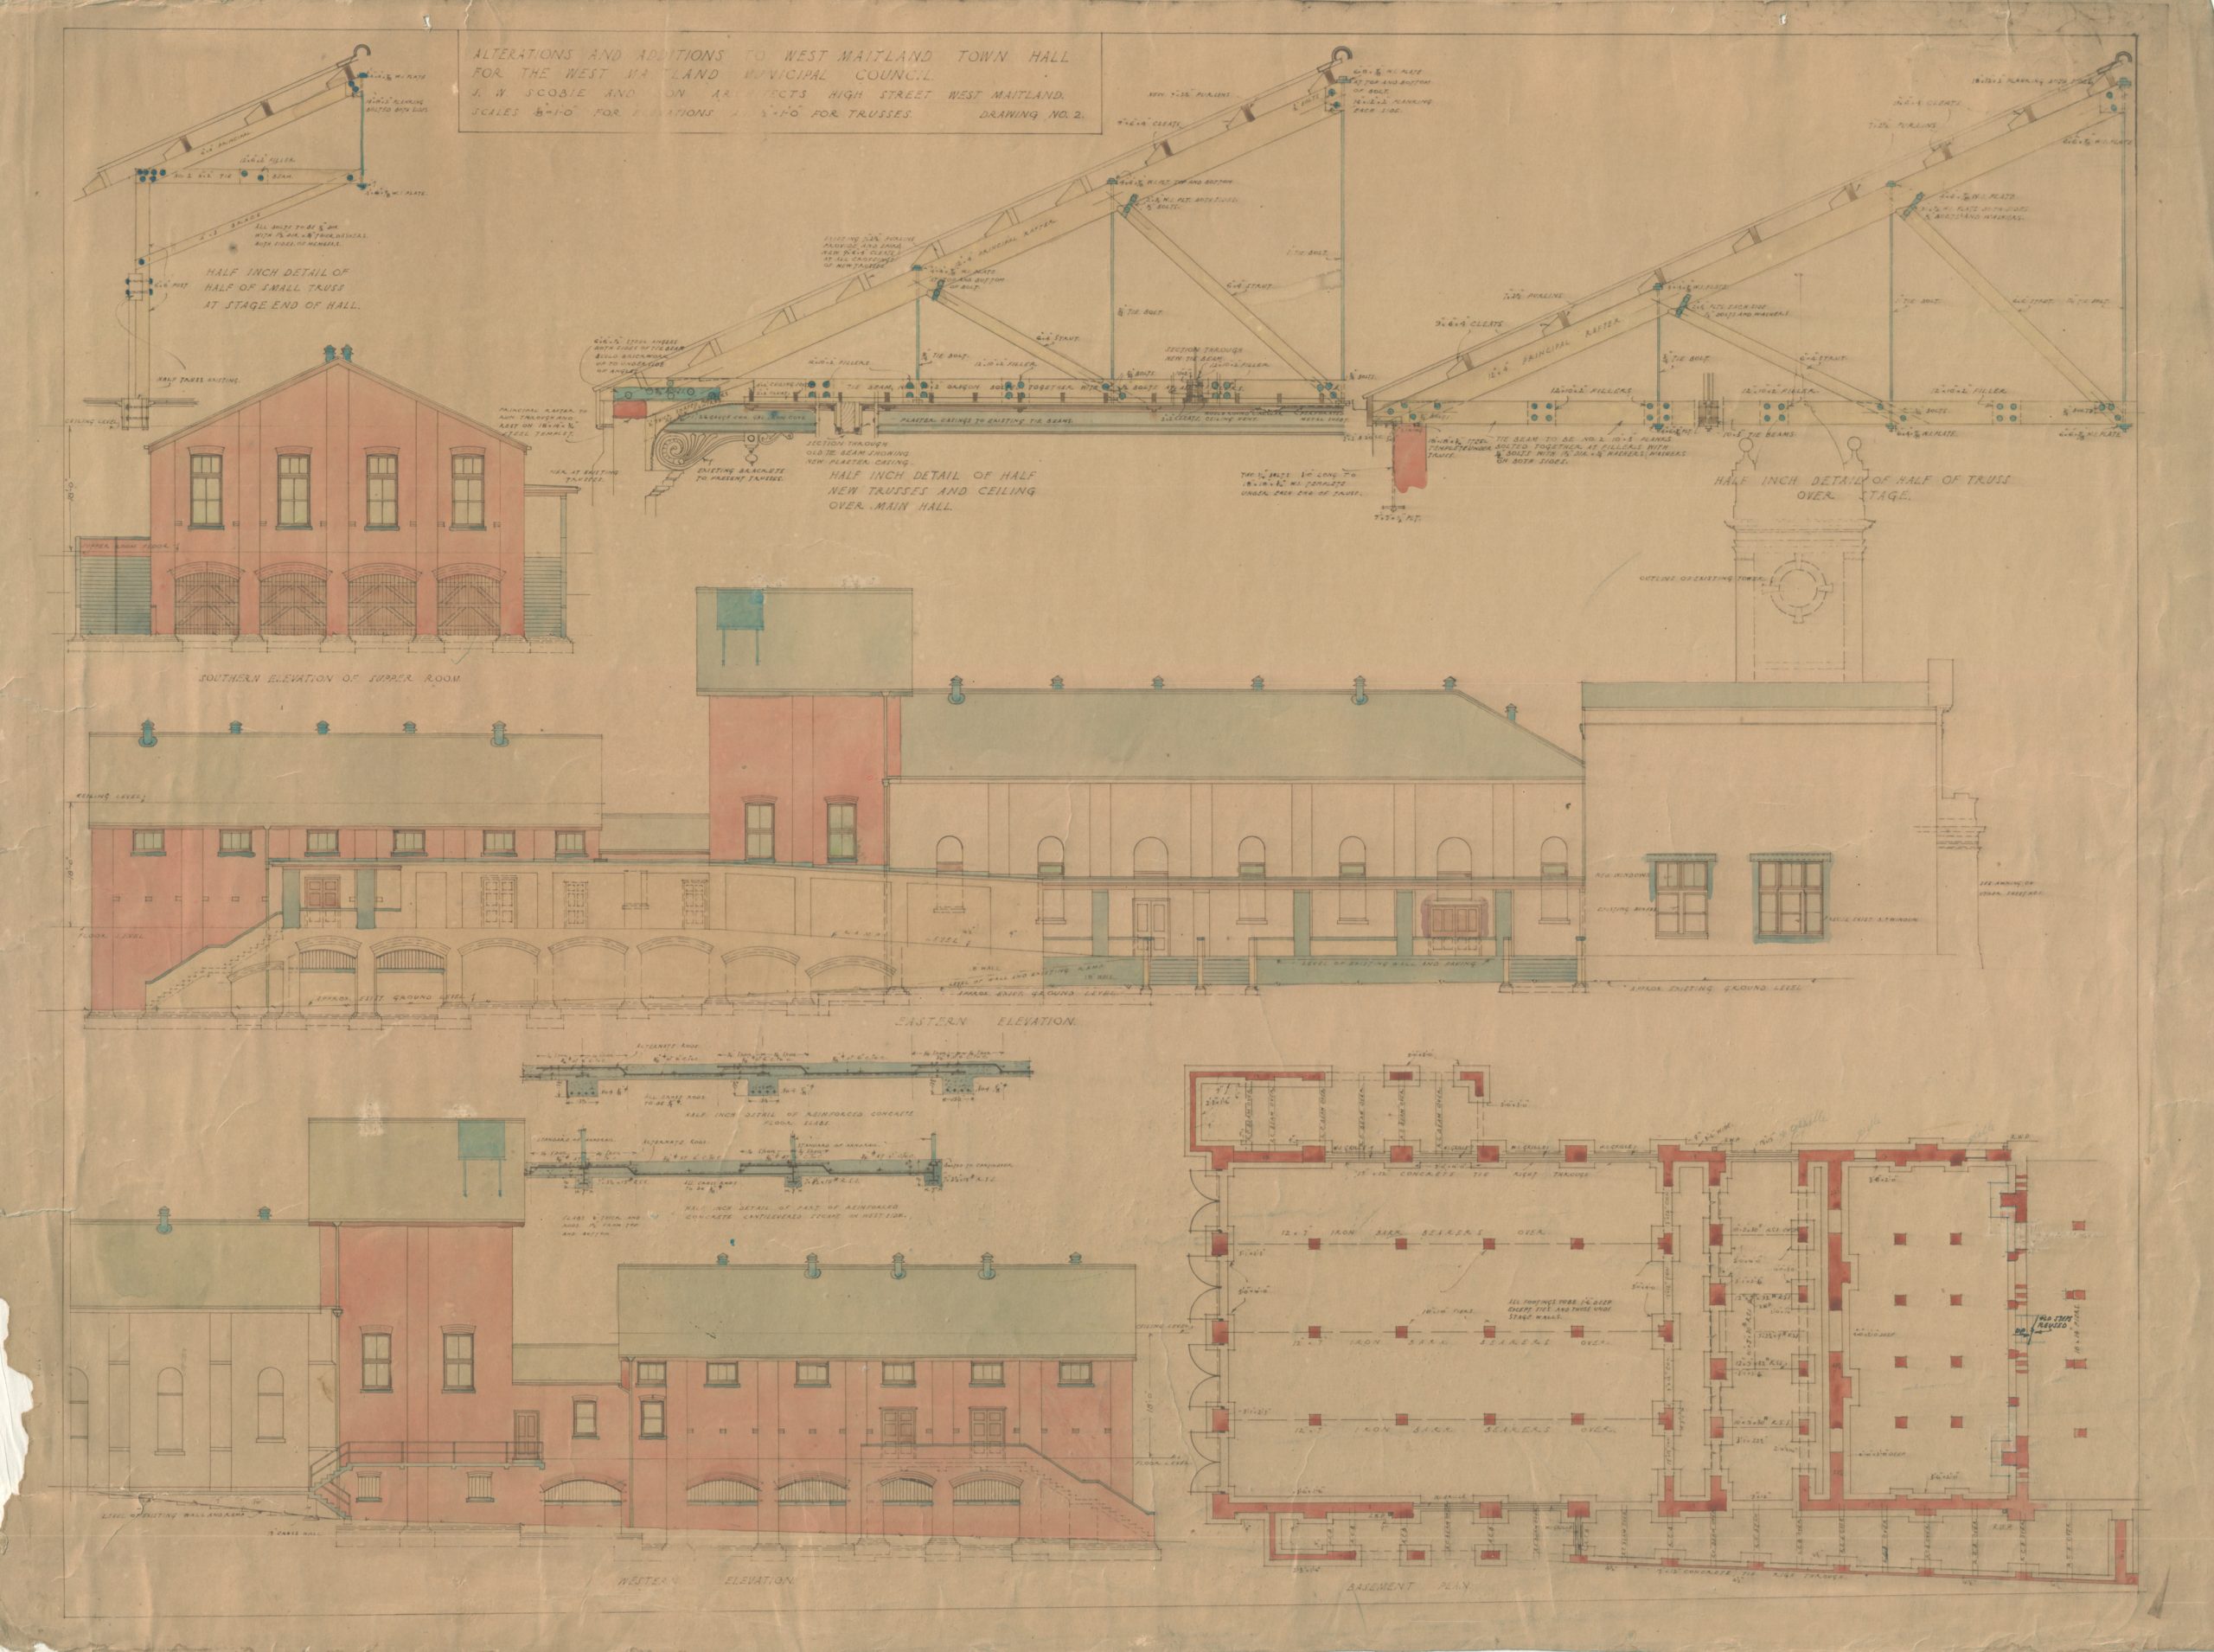 hand-drawn architectural plan for West Maitland Town Hall depicting a floor plan alongside various cross-sections